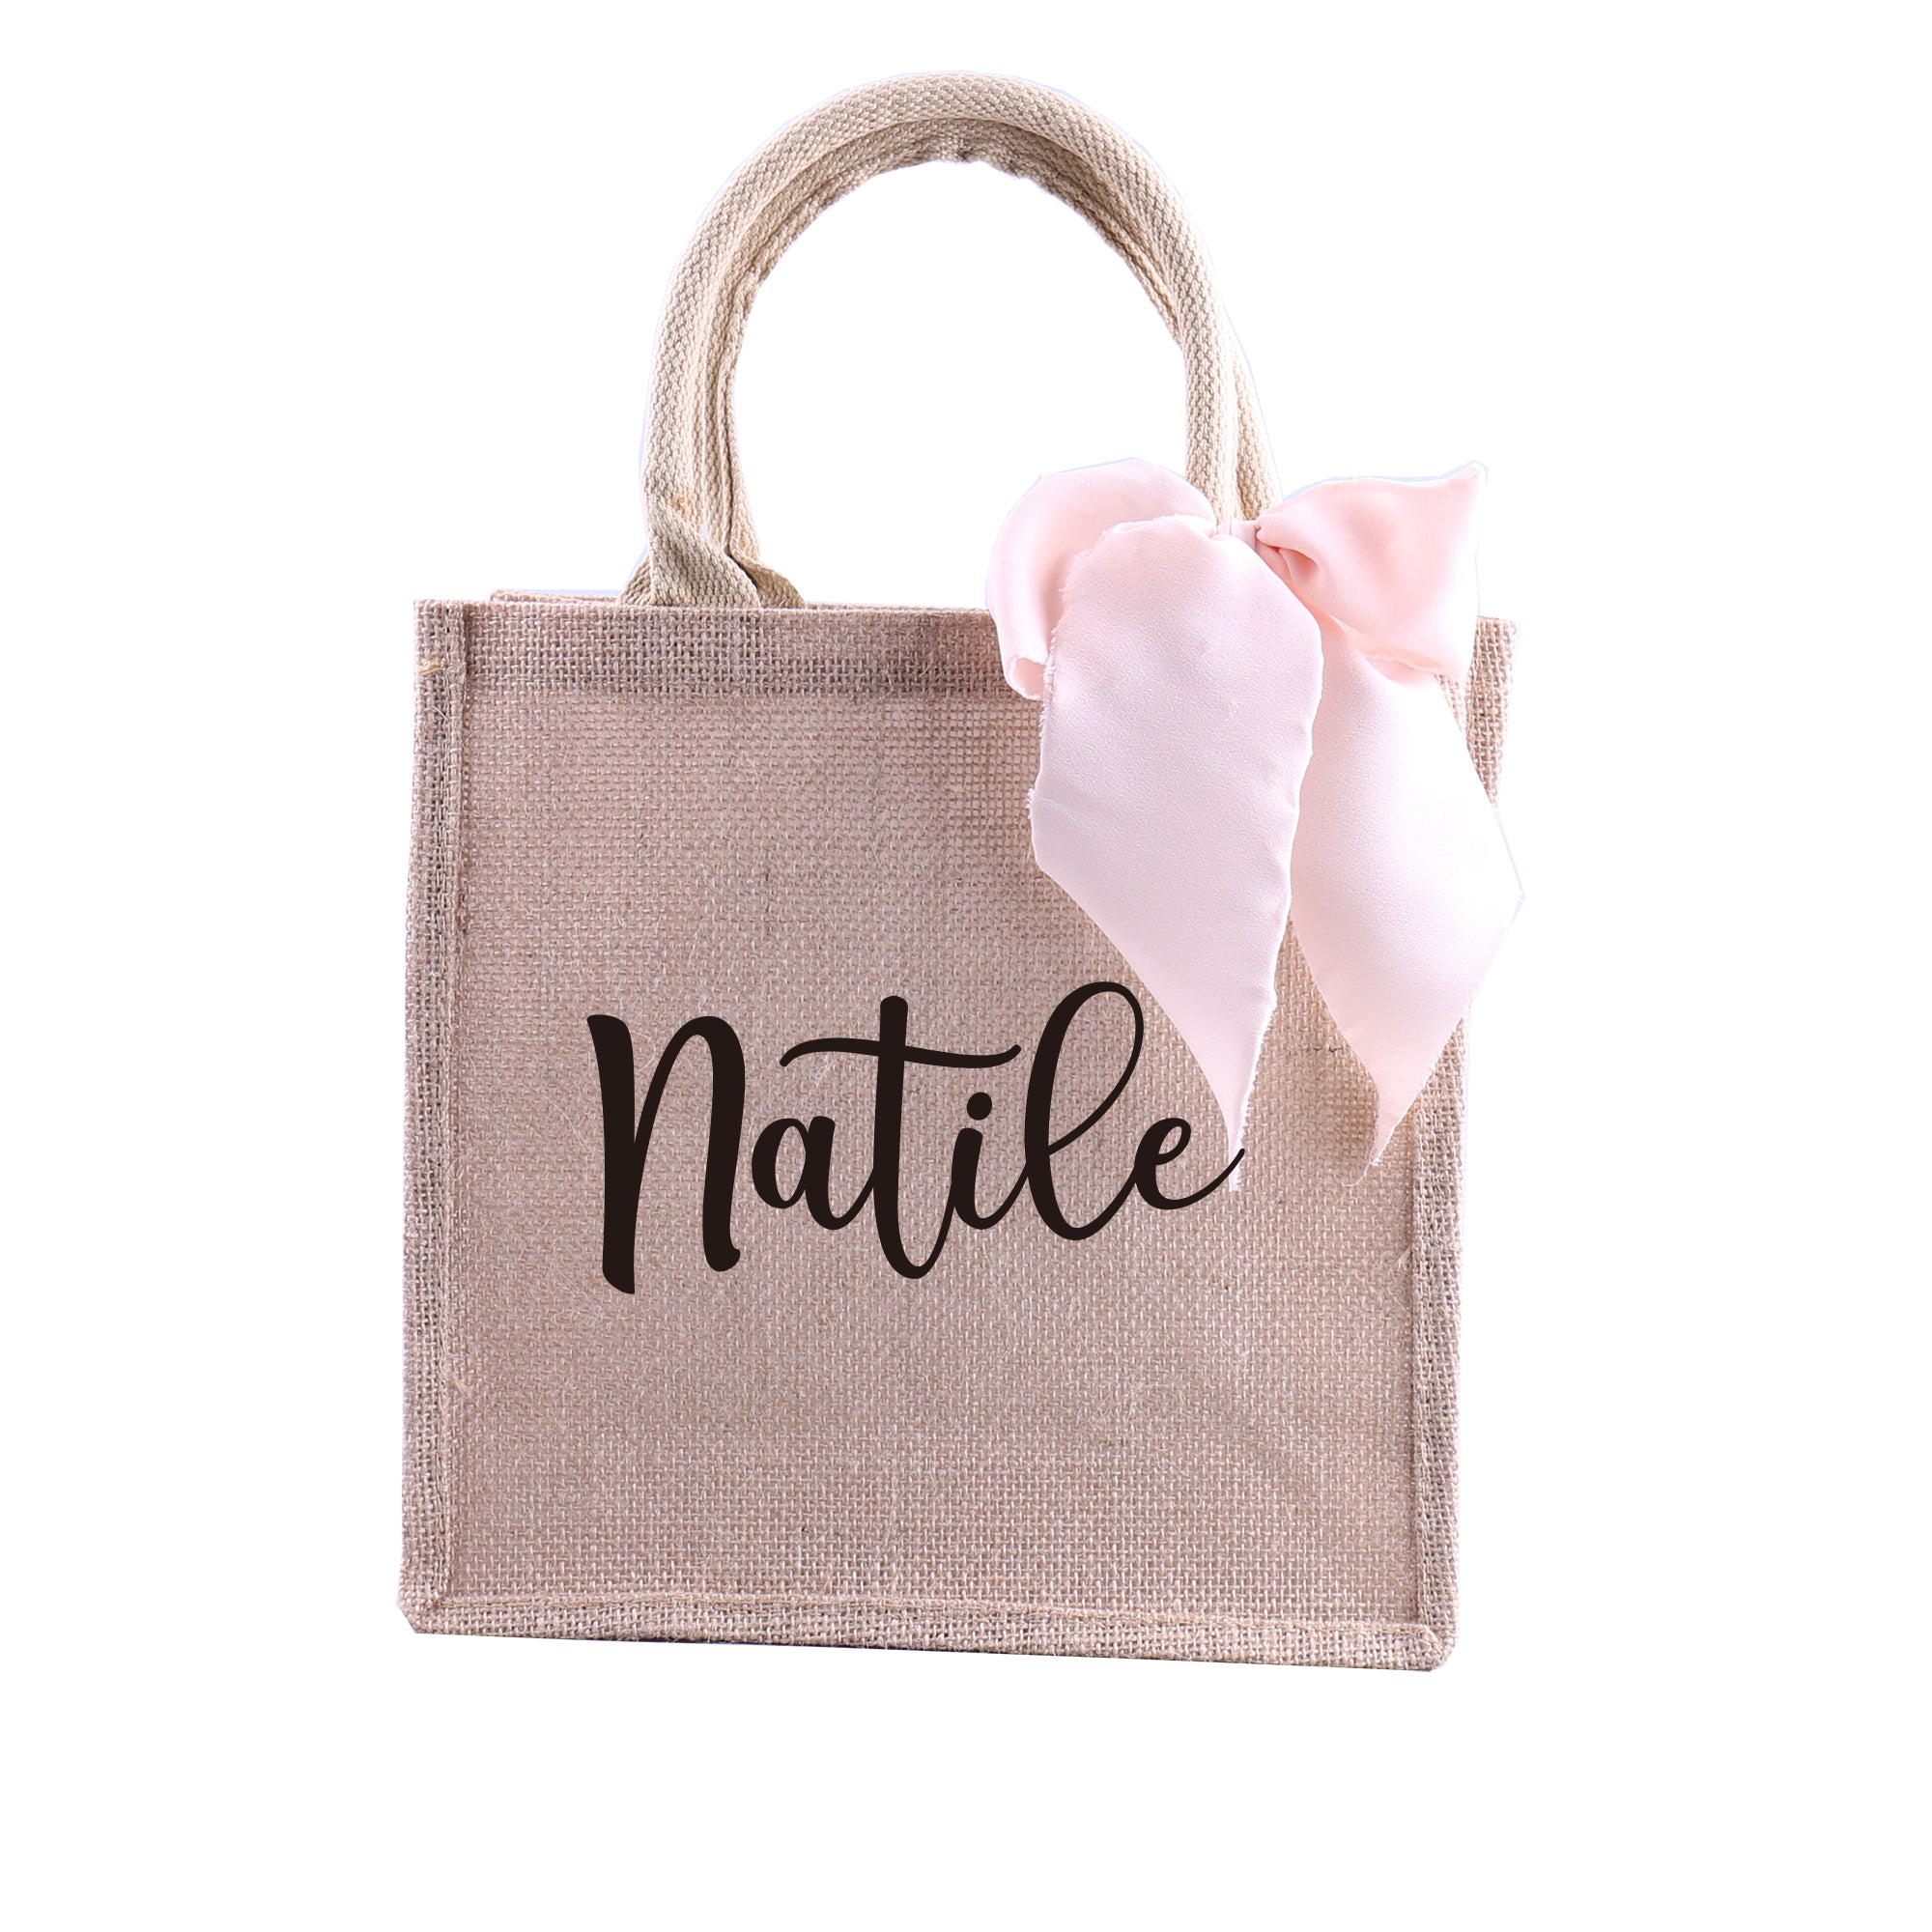 Bridal Party Tote Personalized with a Stylized Monogram – Sockprints